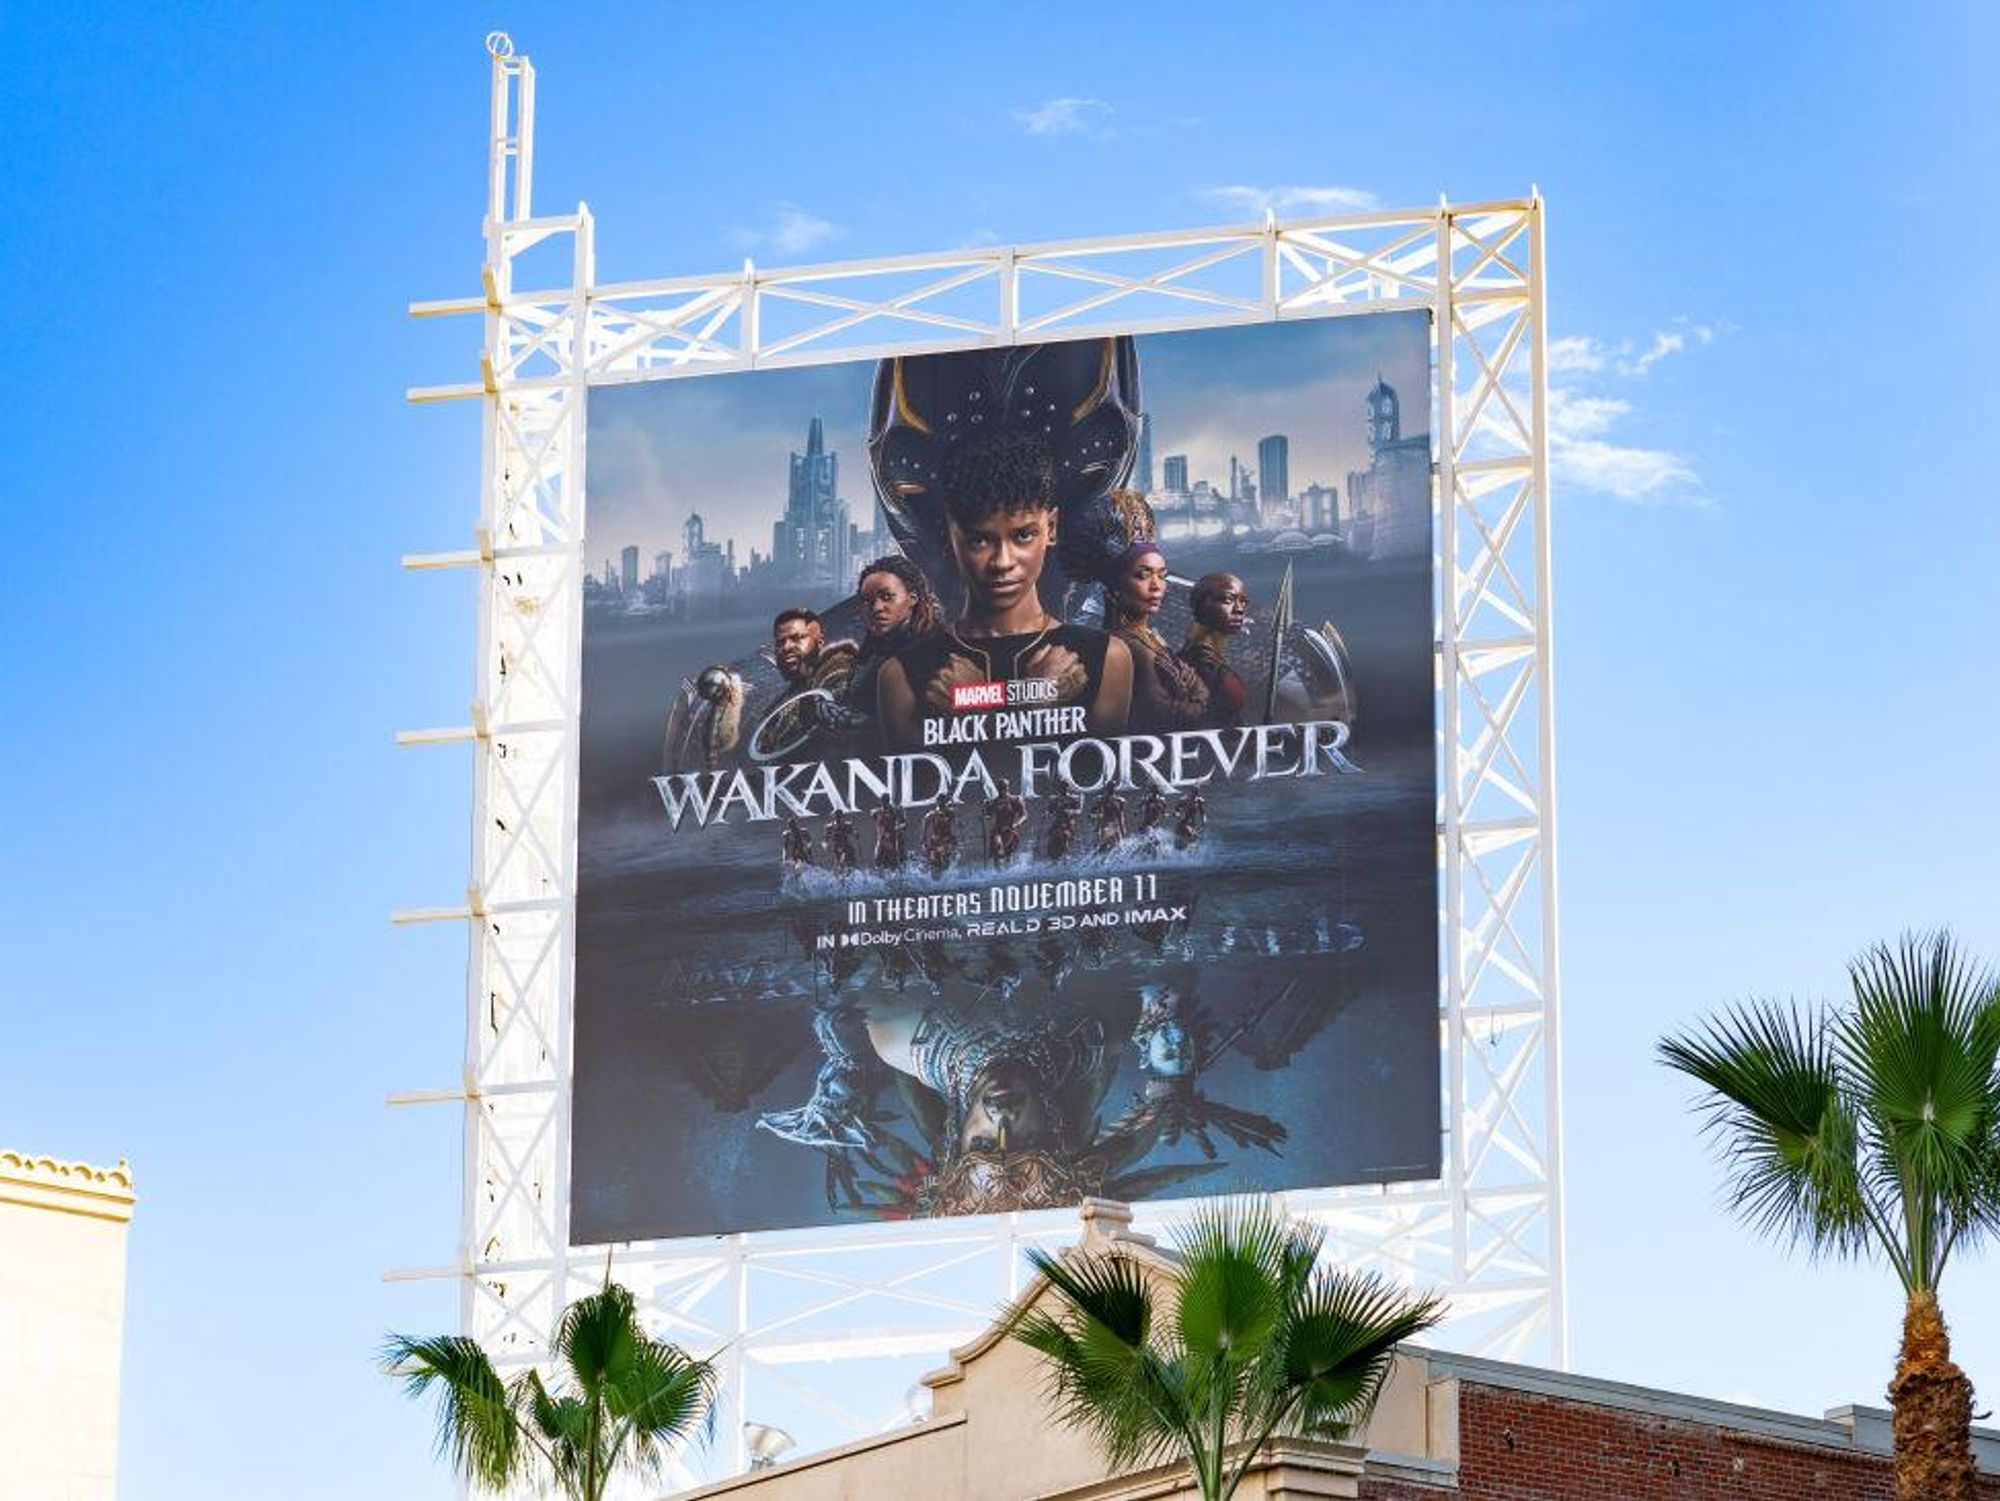 Lagos Will Host The African Premiere of 'Black Panther: Wakanda Forever'